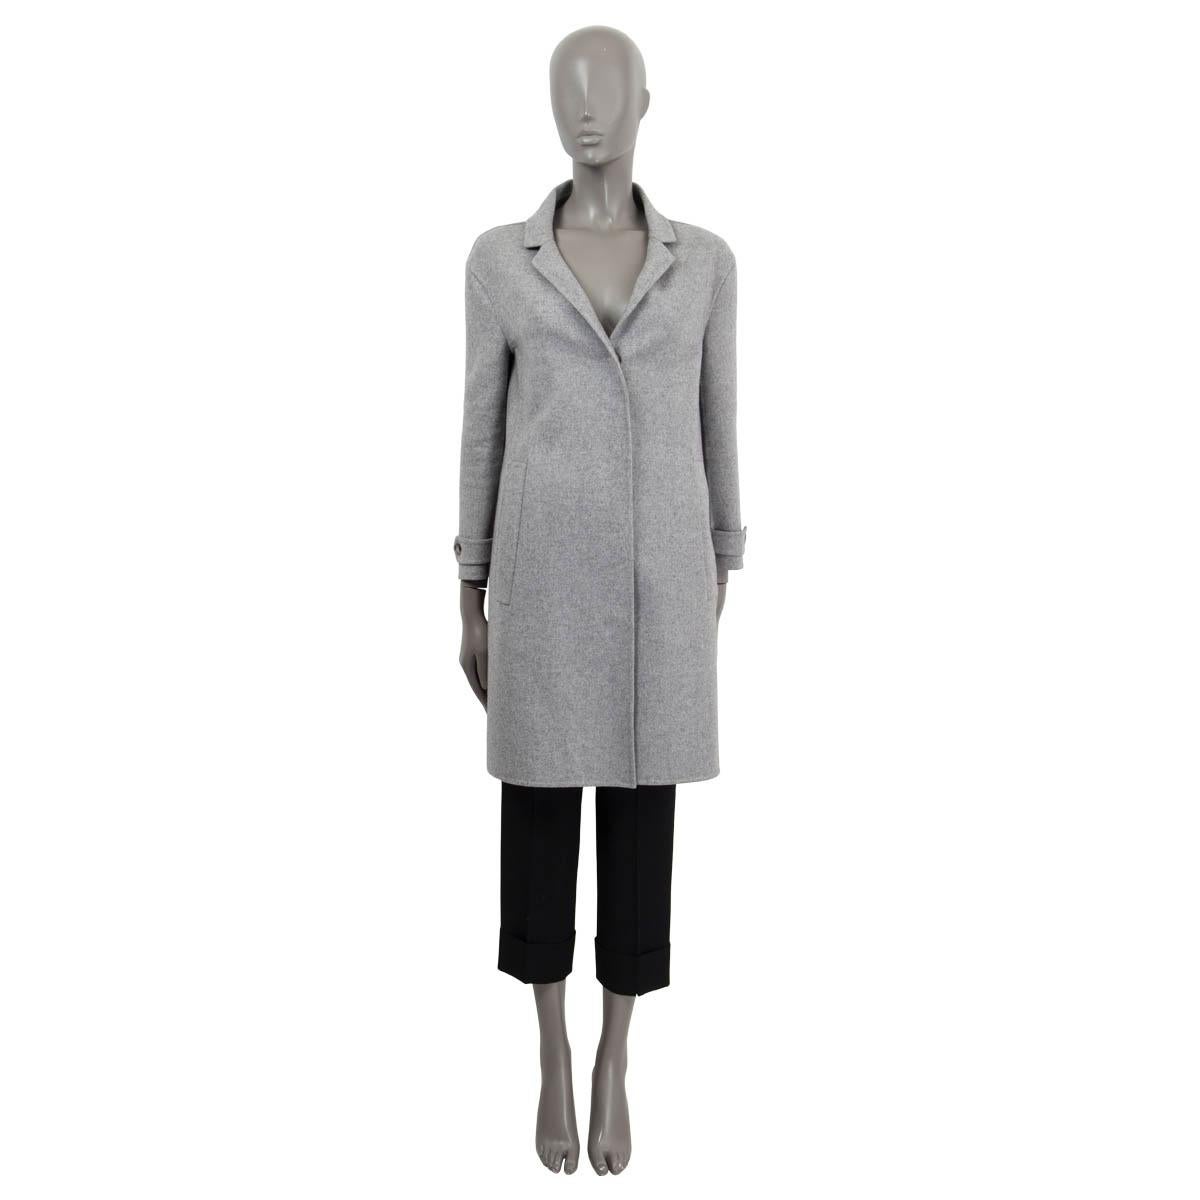 100% authentic Burberry A-Line coat in gray cashmere (100%). Features 7/8 sleeves, two slit pockets on the front and a slit on the back. Opens with four buttons on the front. Unlined. Has been worn and is in excellent condition.

2014